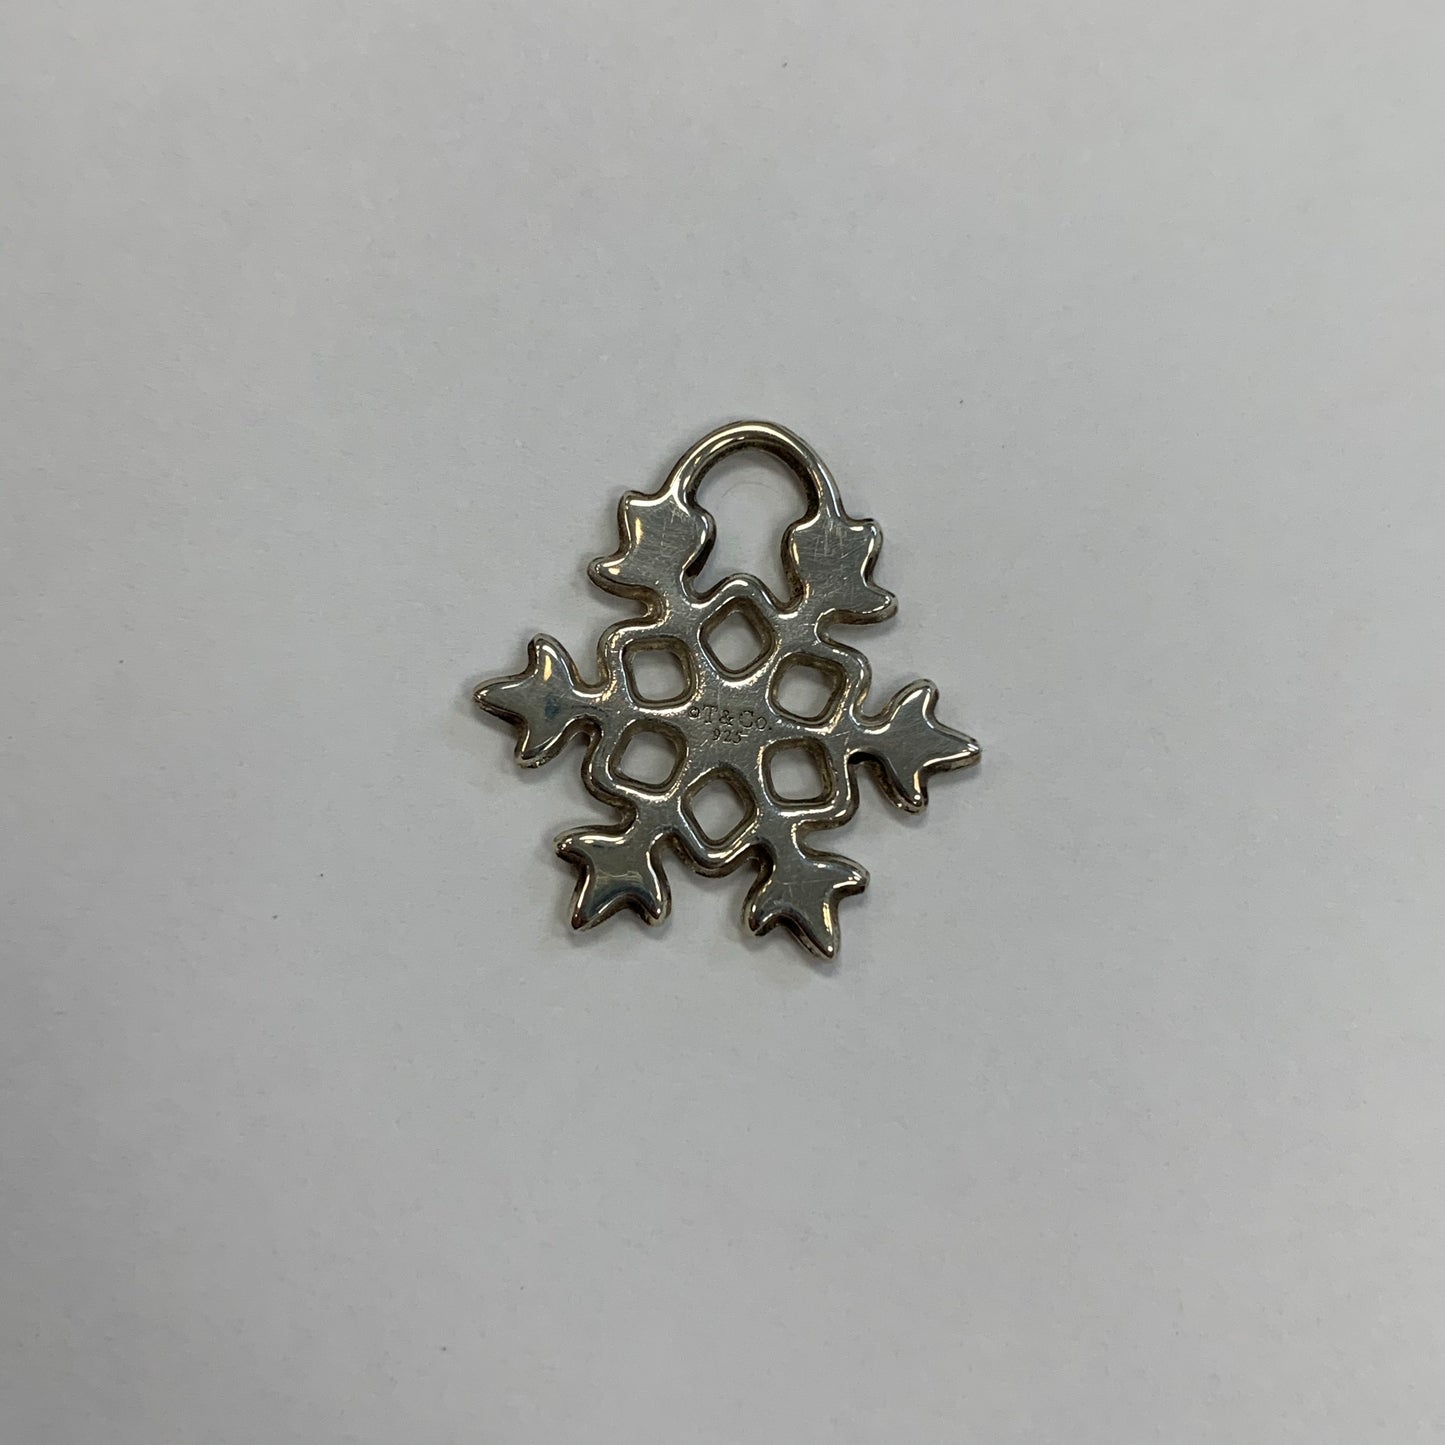 Authentic Tiffany Sterling Silver Snowflake Charm